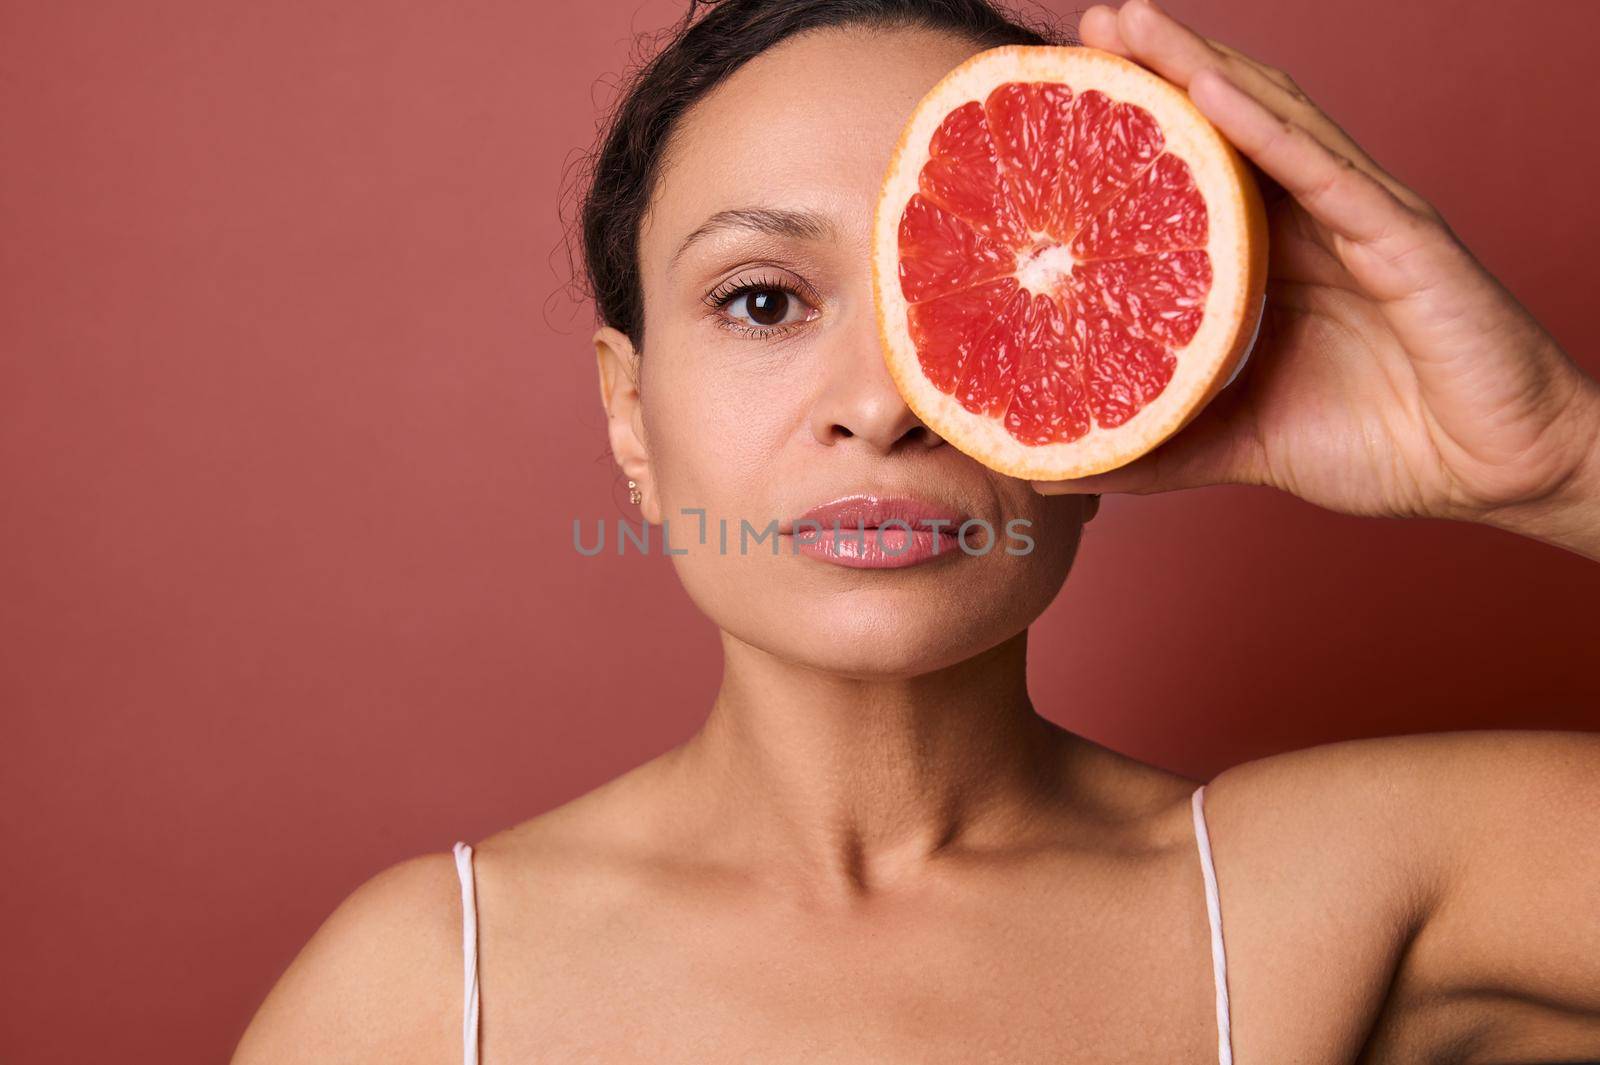 Attractive woman with perfect healthy skin holds a grapefruit in front of her eye, covering with it half of her beautiful face. Using natural organic plant based ingredients for skin care cosmetics by artgf